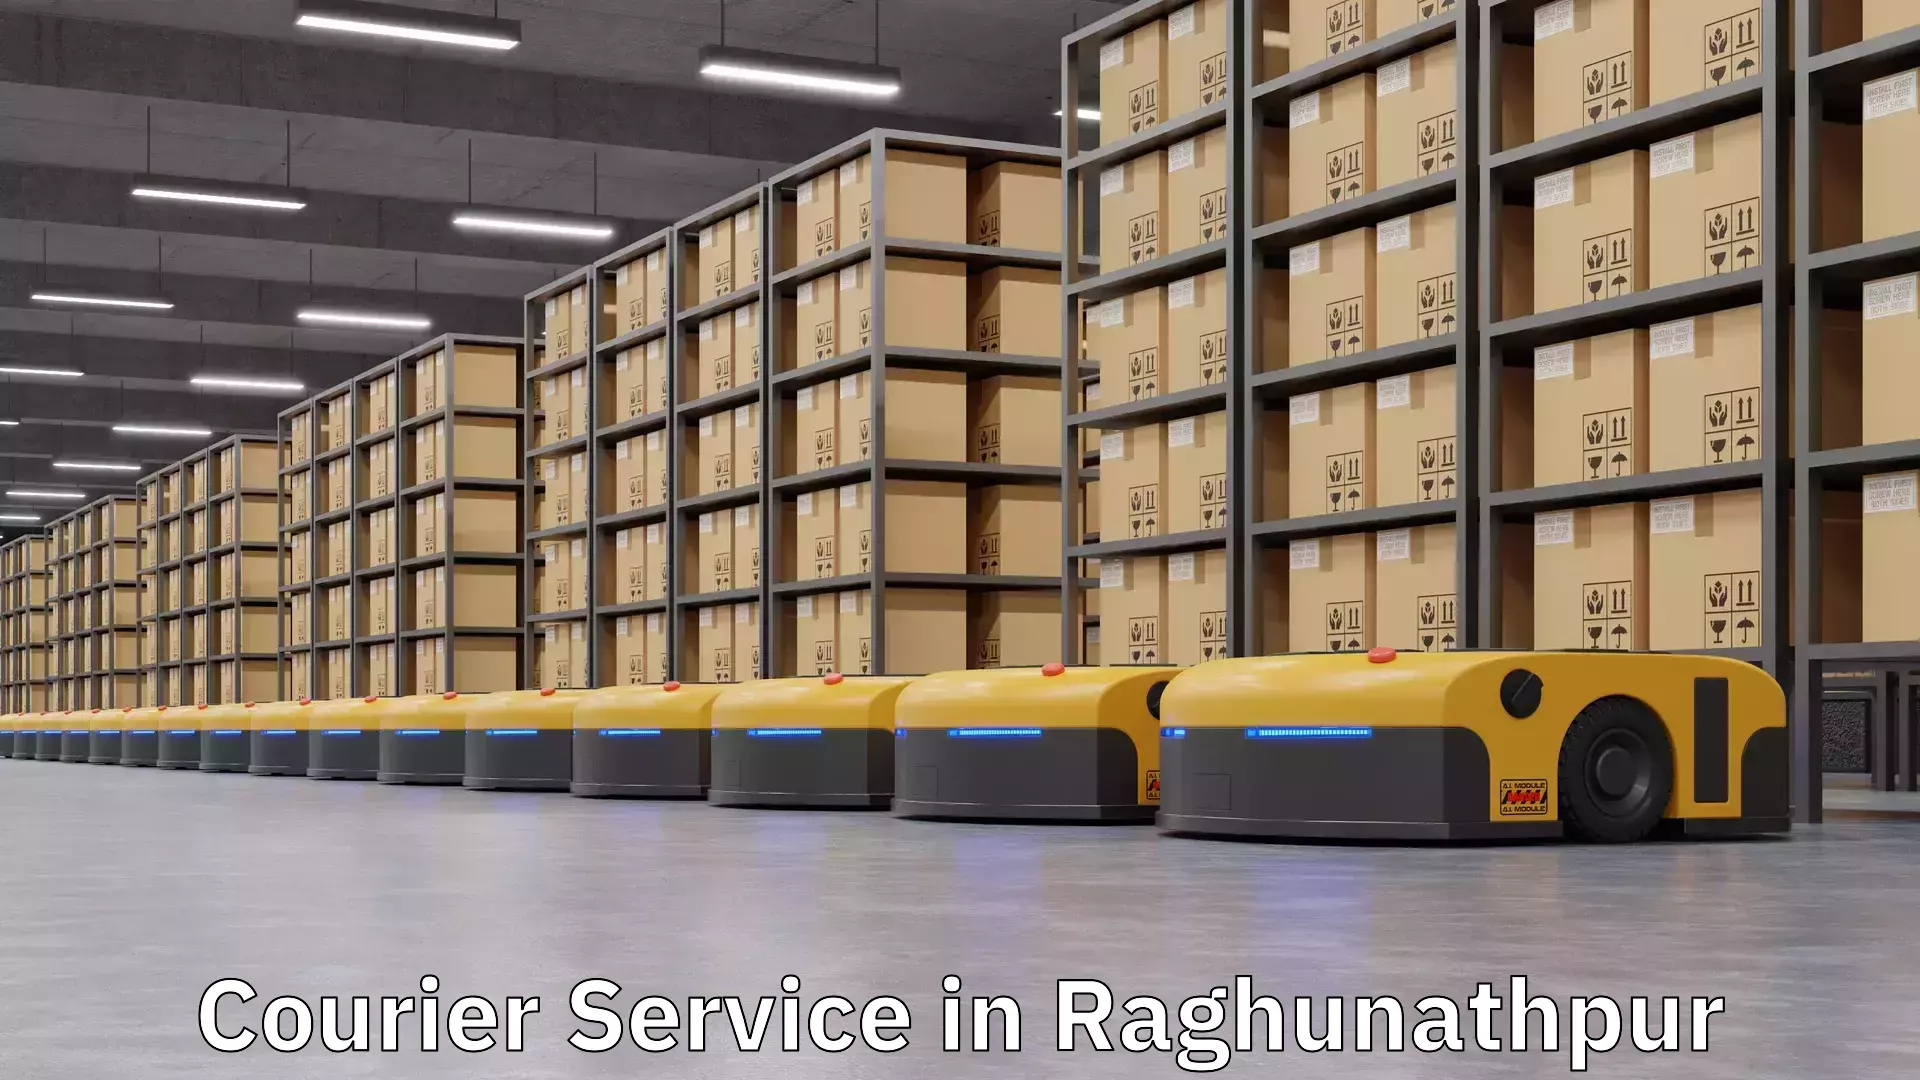 Short distance delivery in Raghunathpur